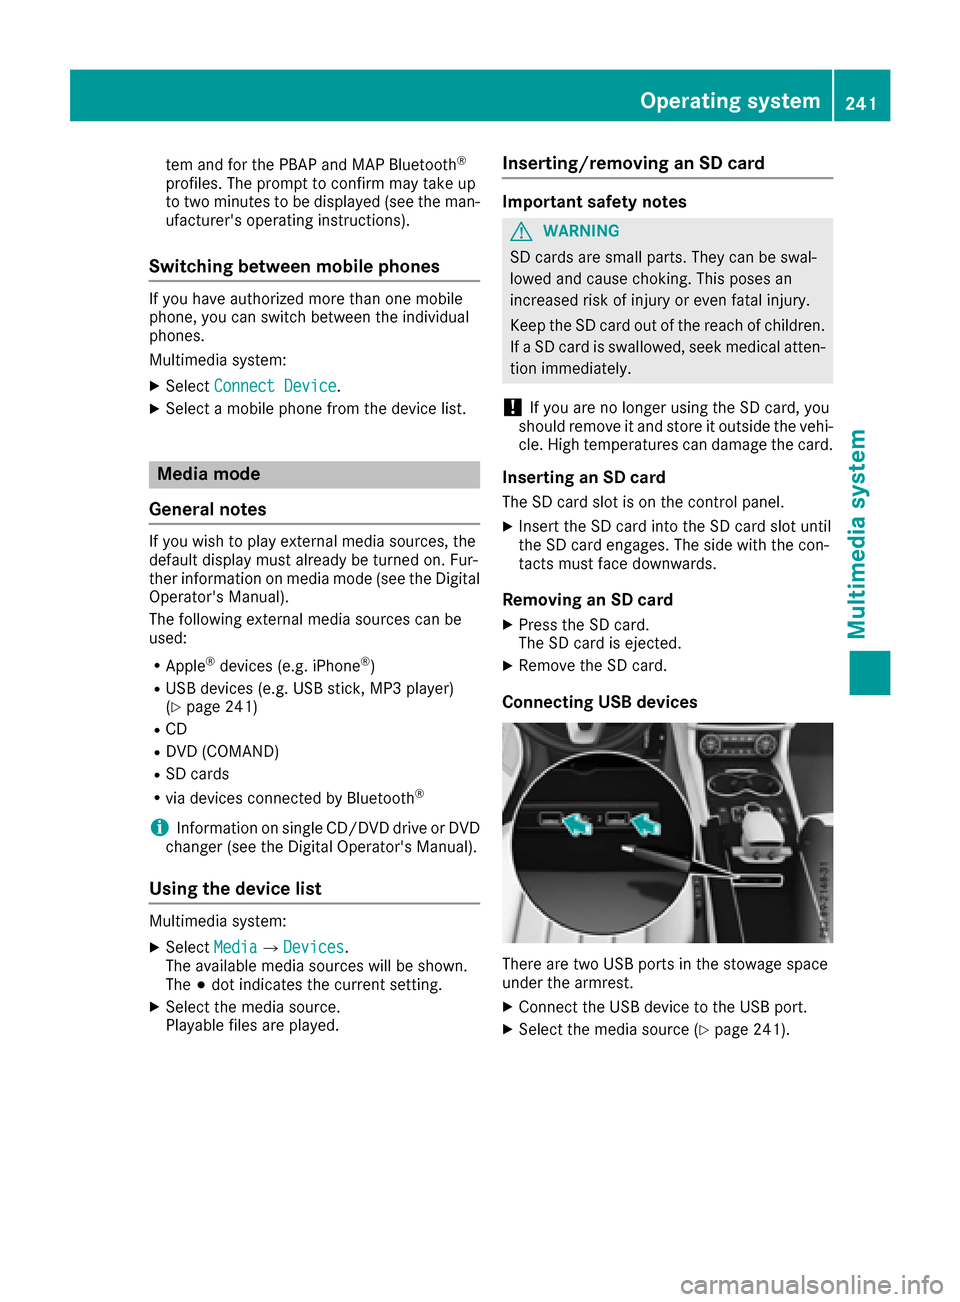 MERCEDES-BENZ CLS-Class 2017 W218 Owners Manual tem and for the PBAP and MAP Bluetooth®
profiles. The prompt to confirm may take up
to two minutes to be displayed (see the man-
ufacturers operating instructions).
Switching between mobile phones
I